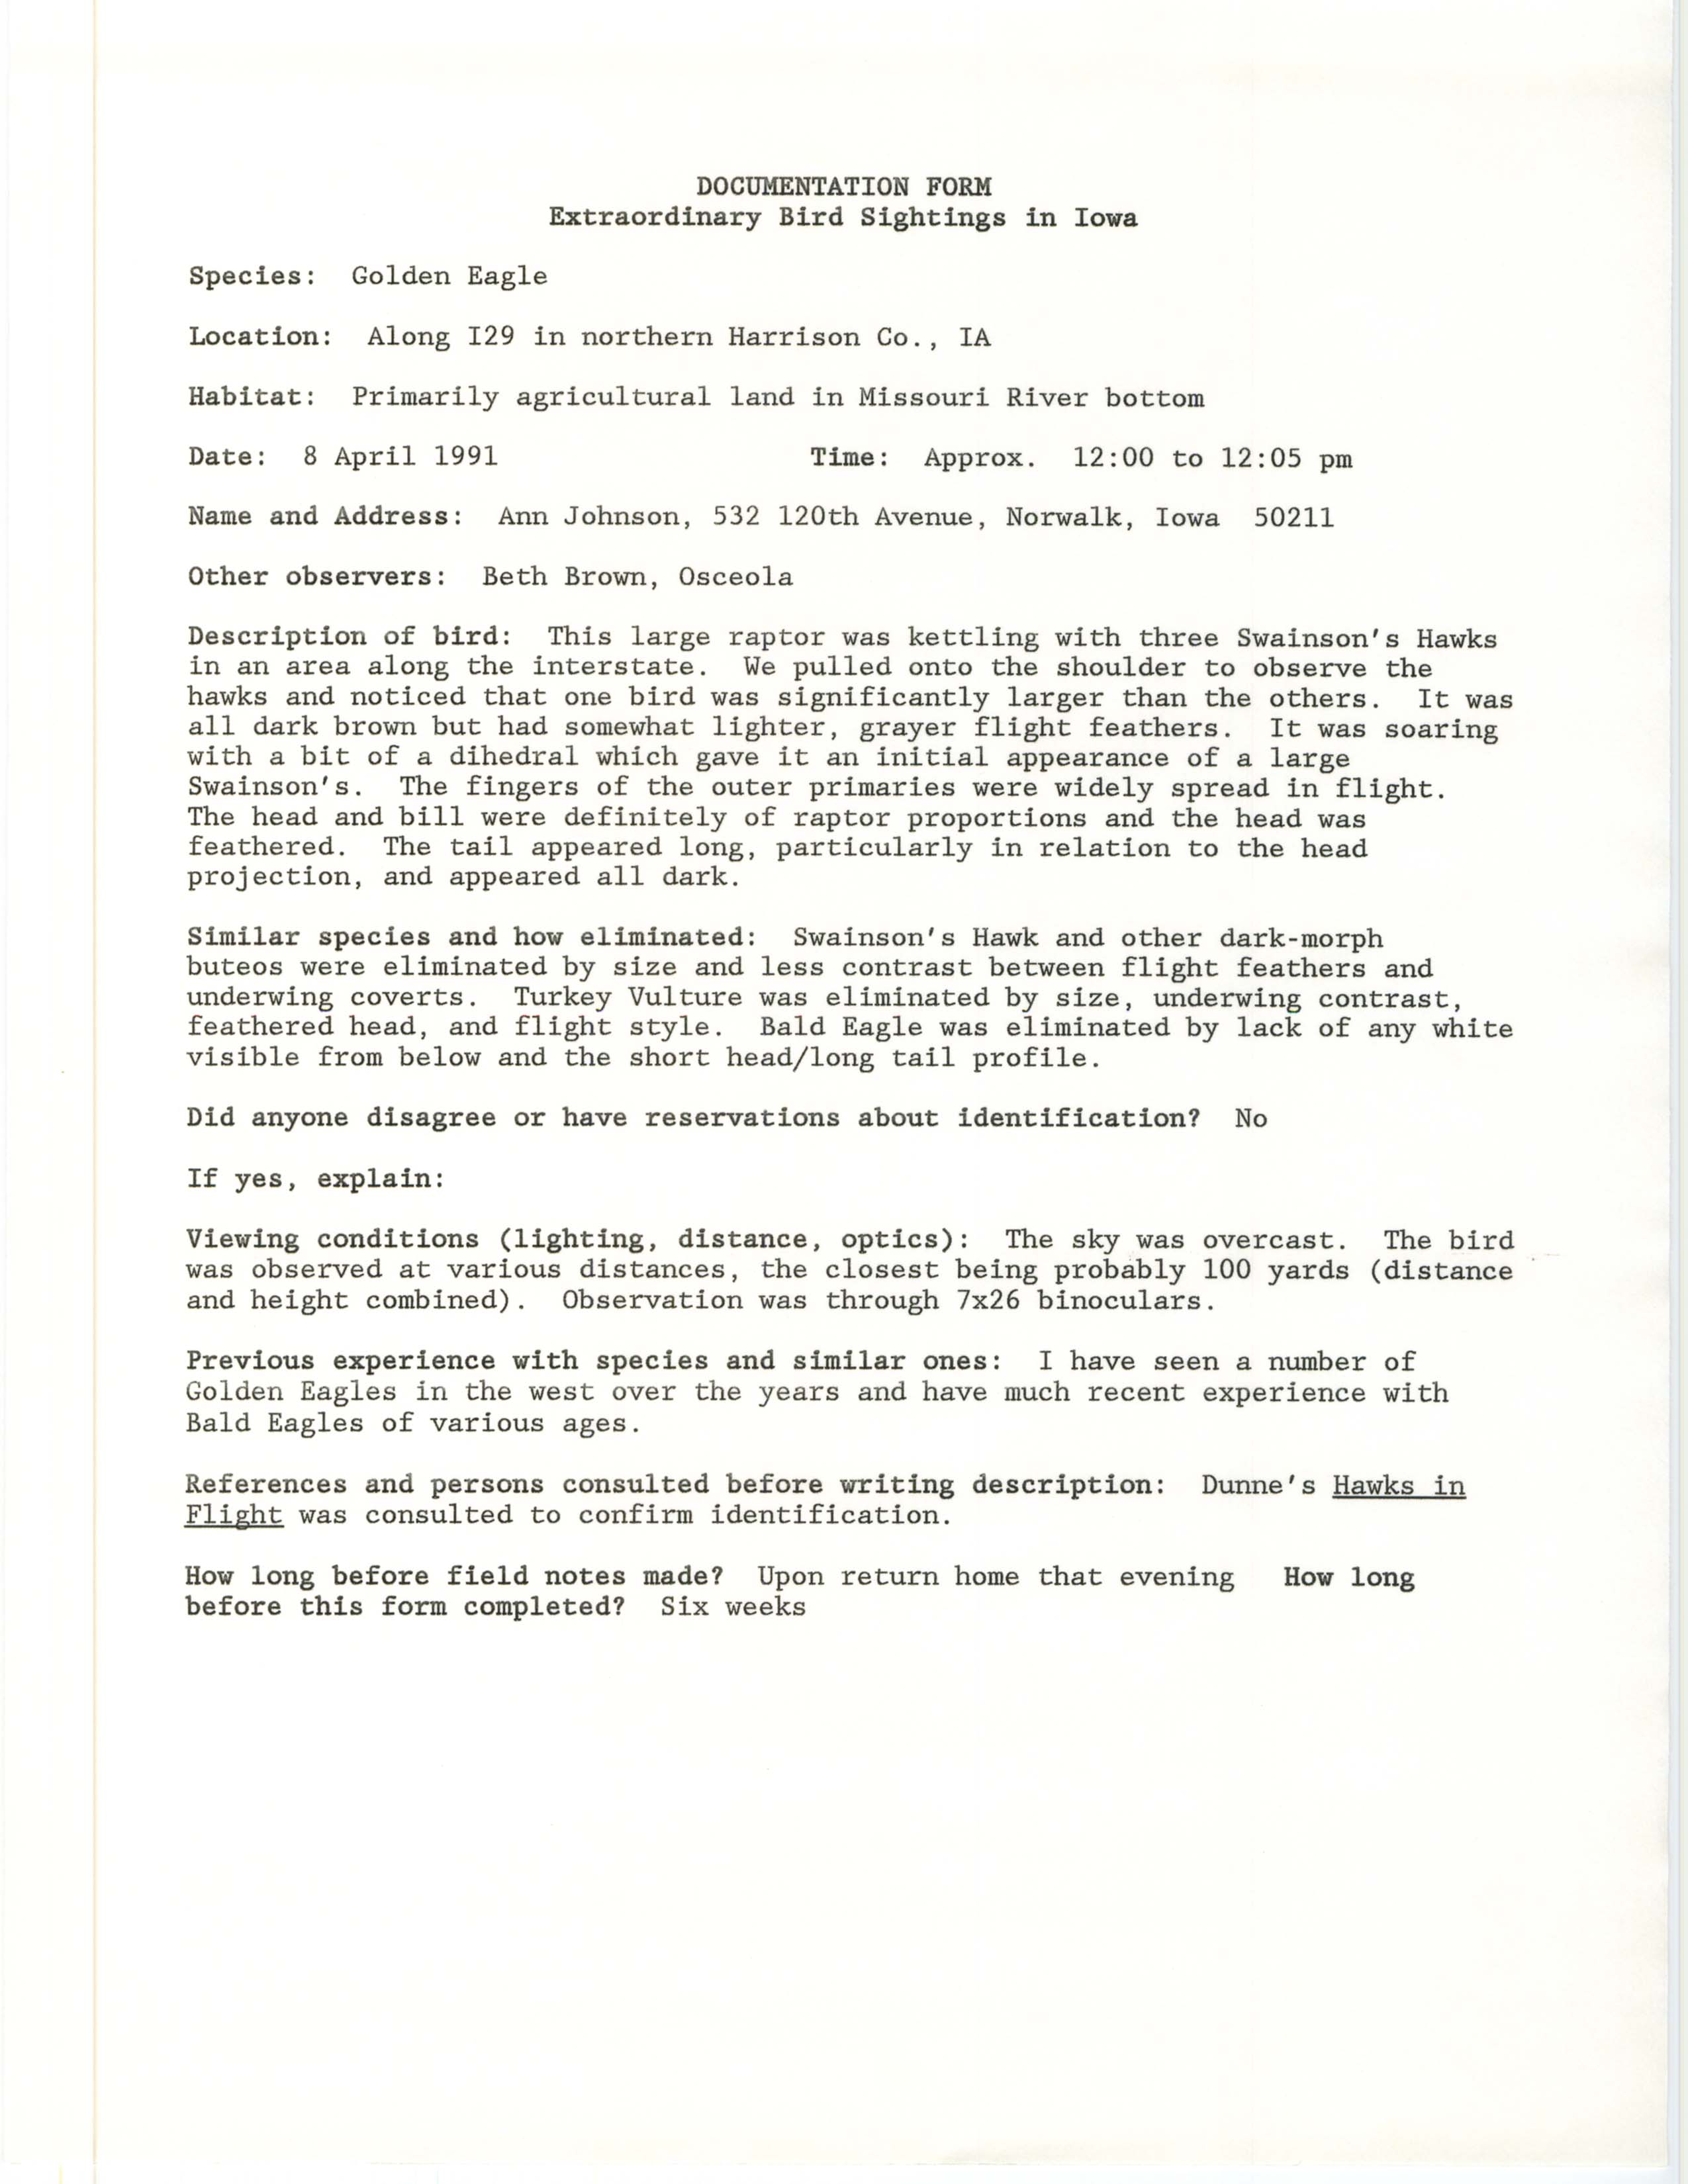 Rare bird documentation form for Golden Eagle in northern Harrison County, 1991